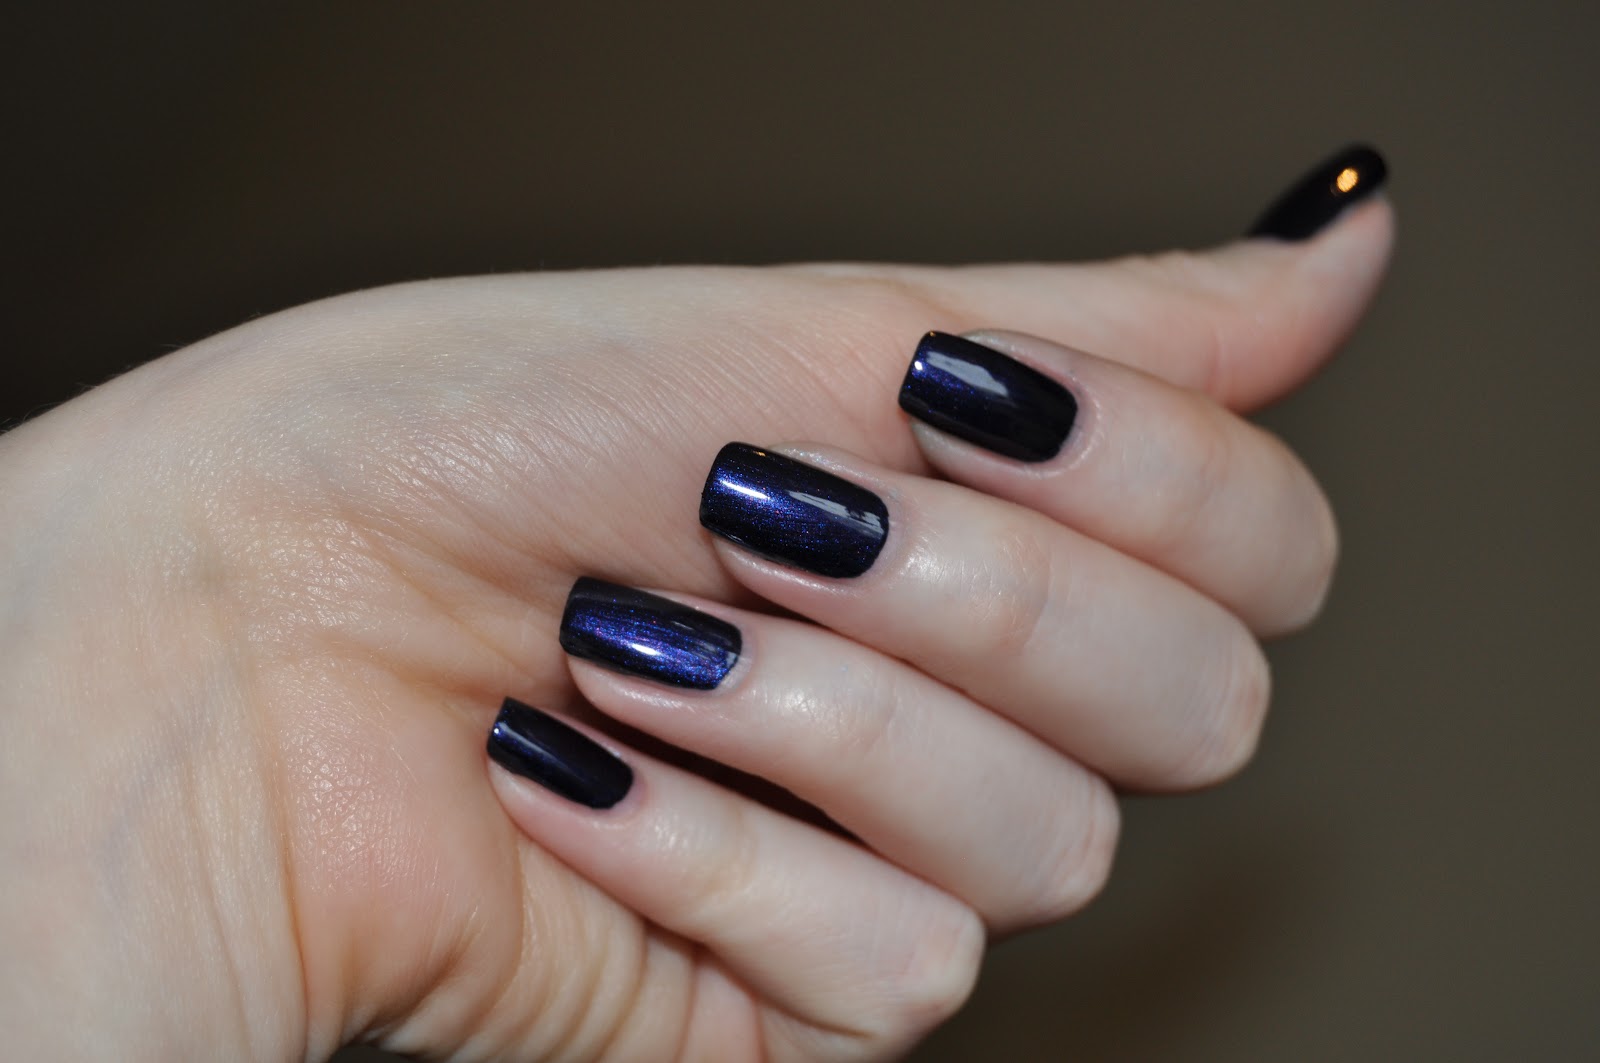 9. OPI Nail Lacquer in "Russian Navy" - wide 8